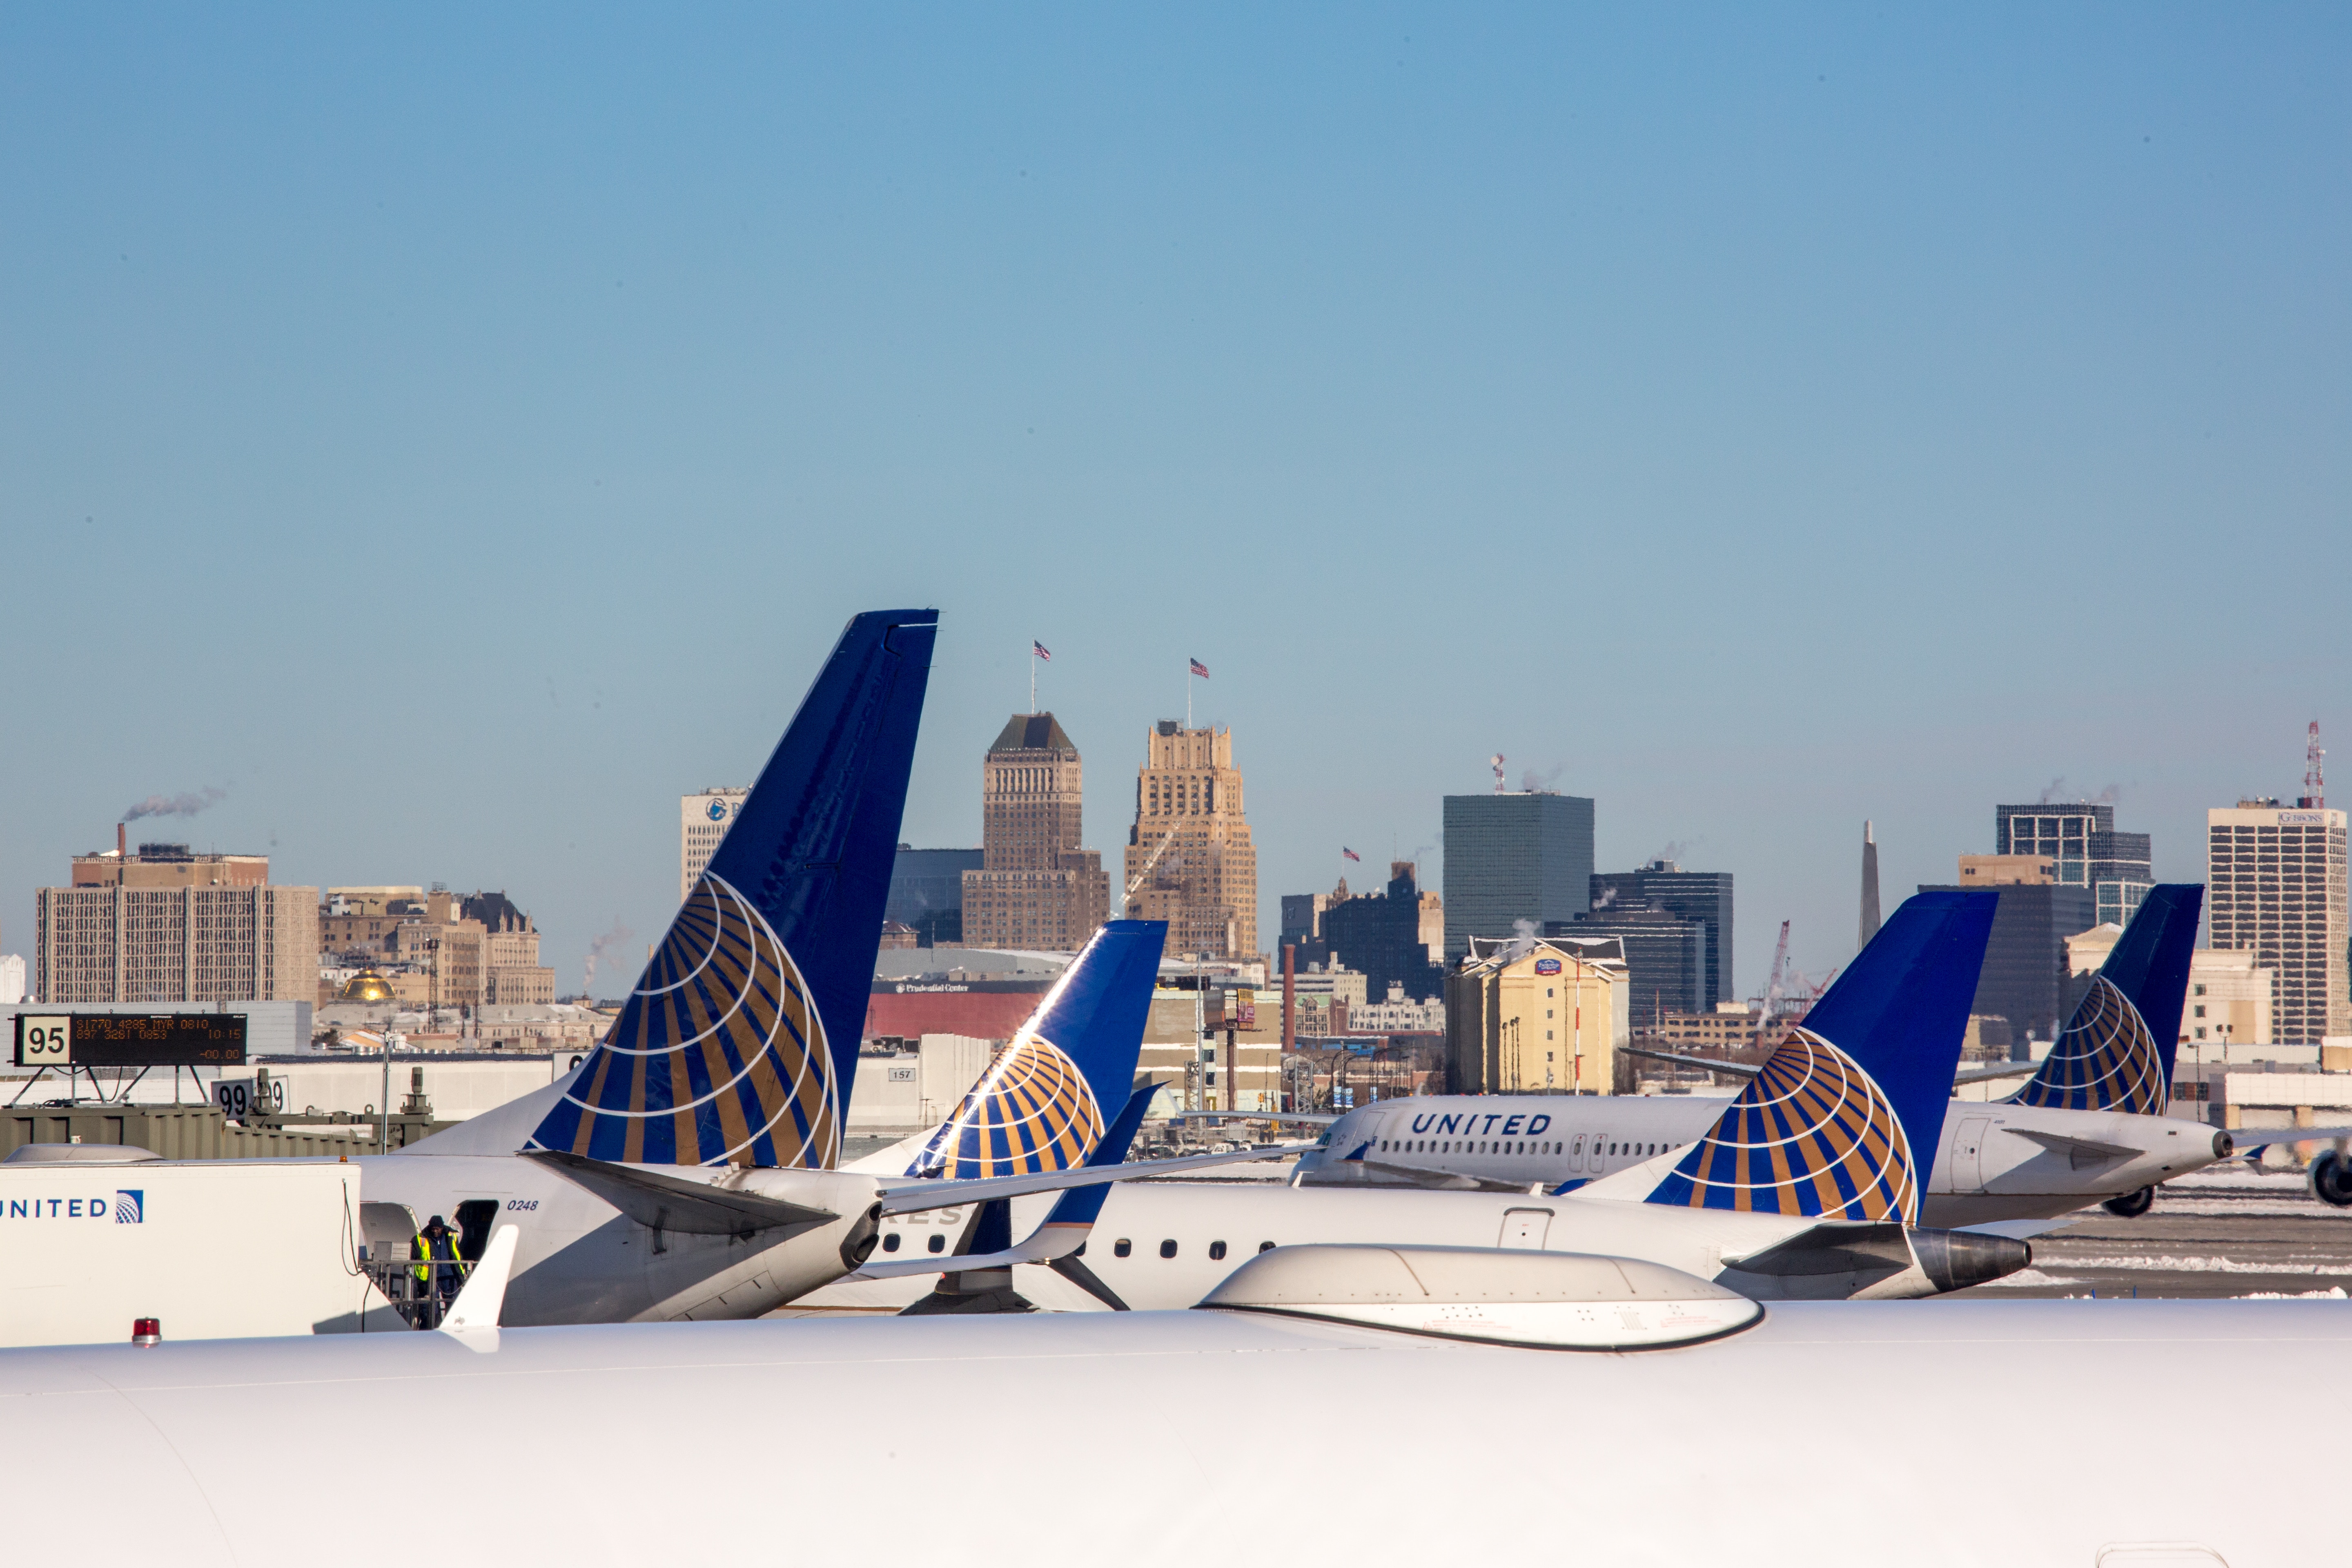 PICTURE OFUNITED AIRCRAFT ON RAMP